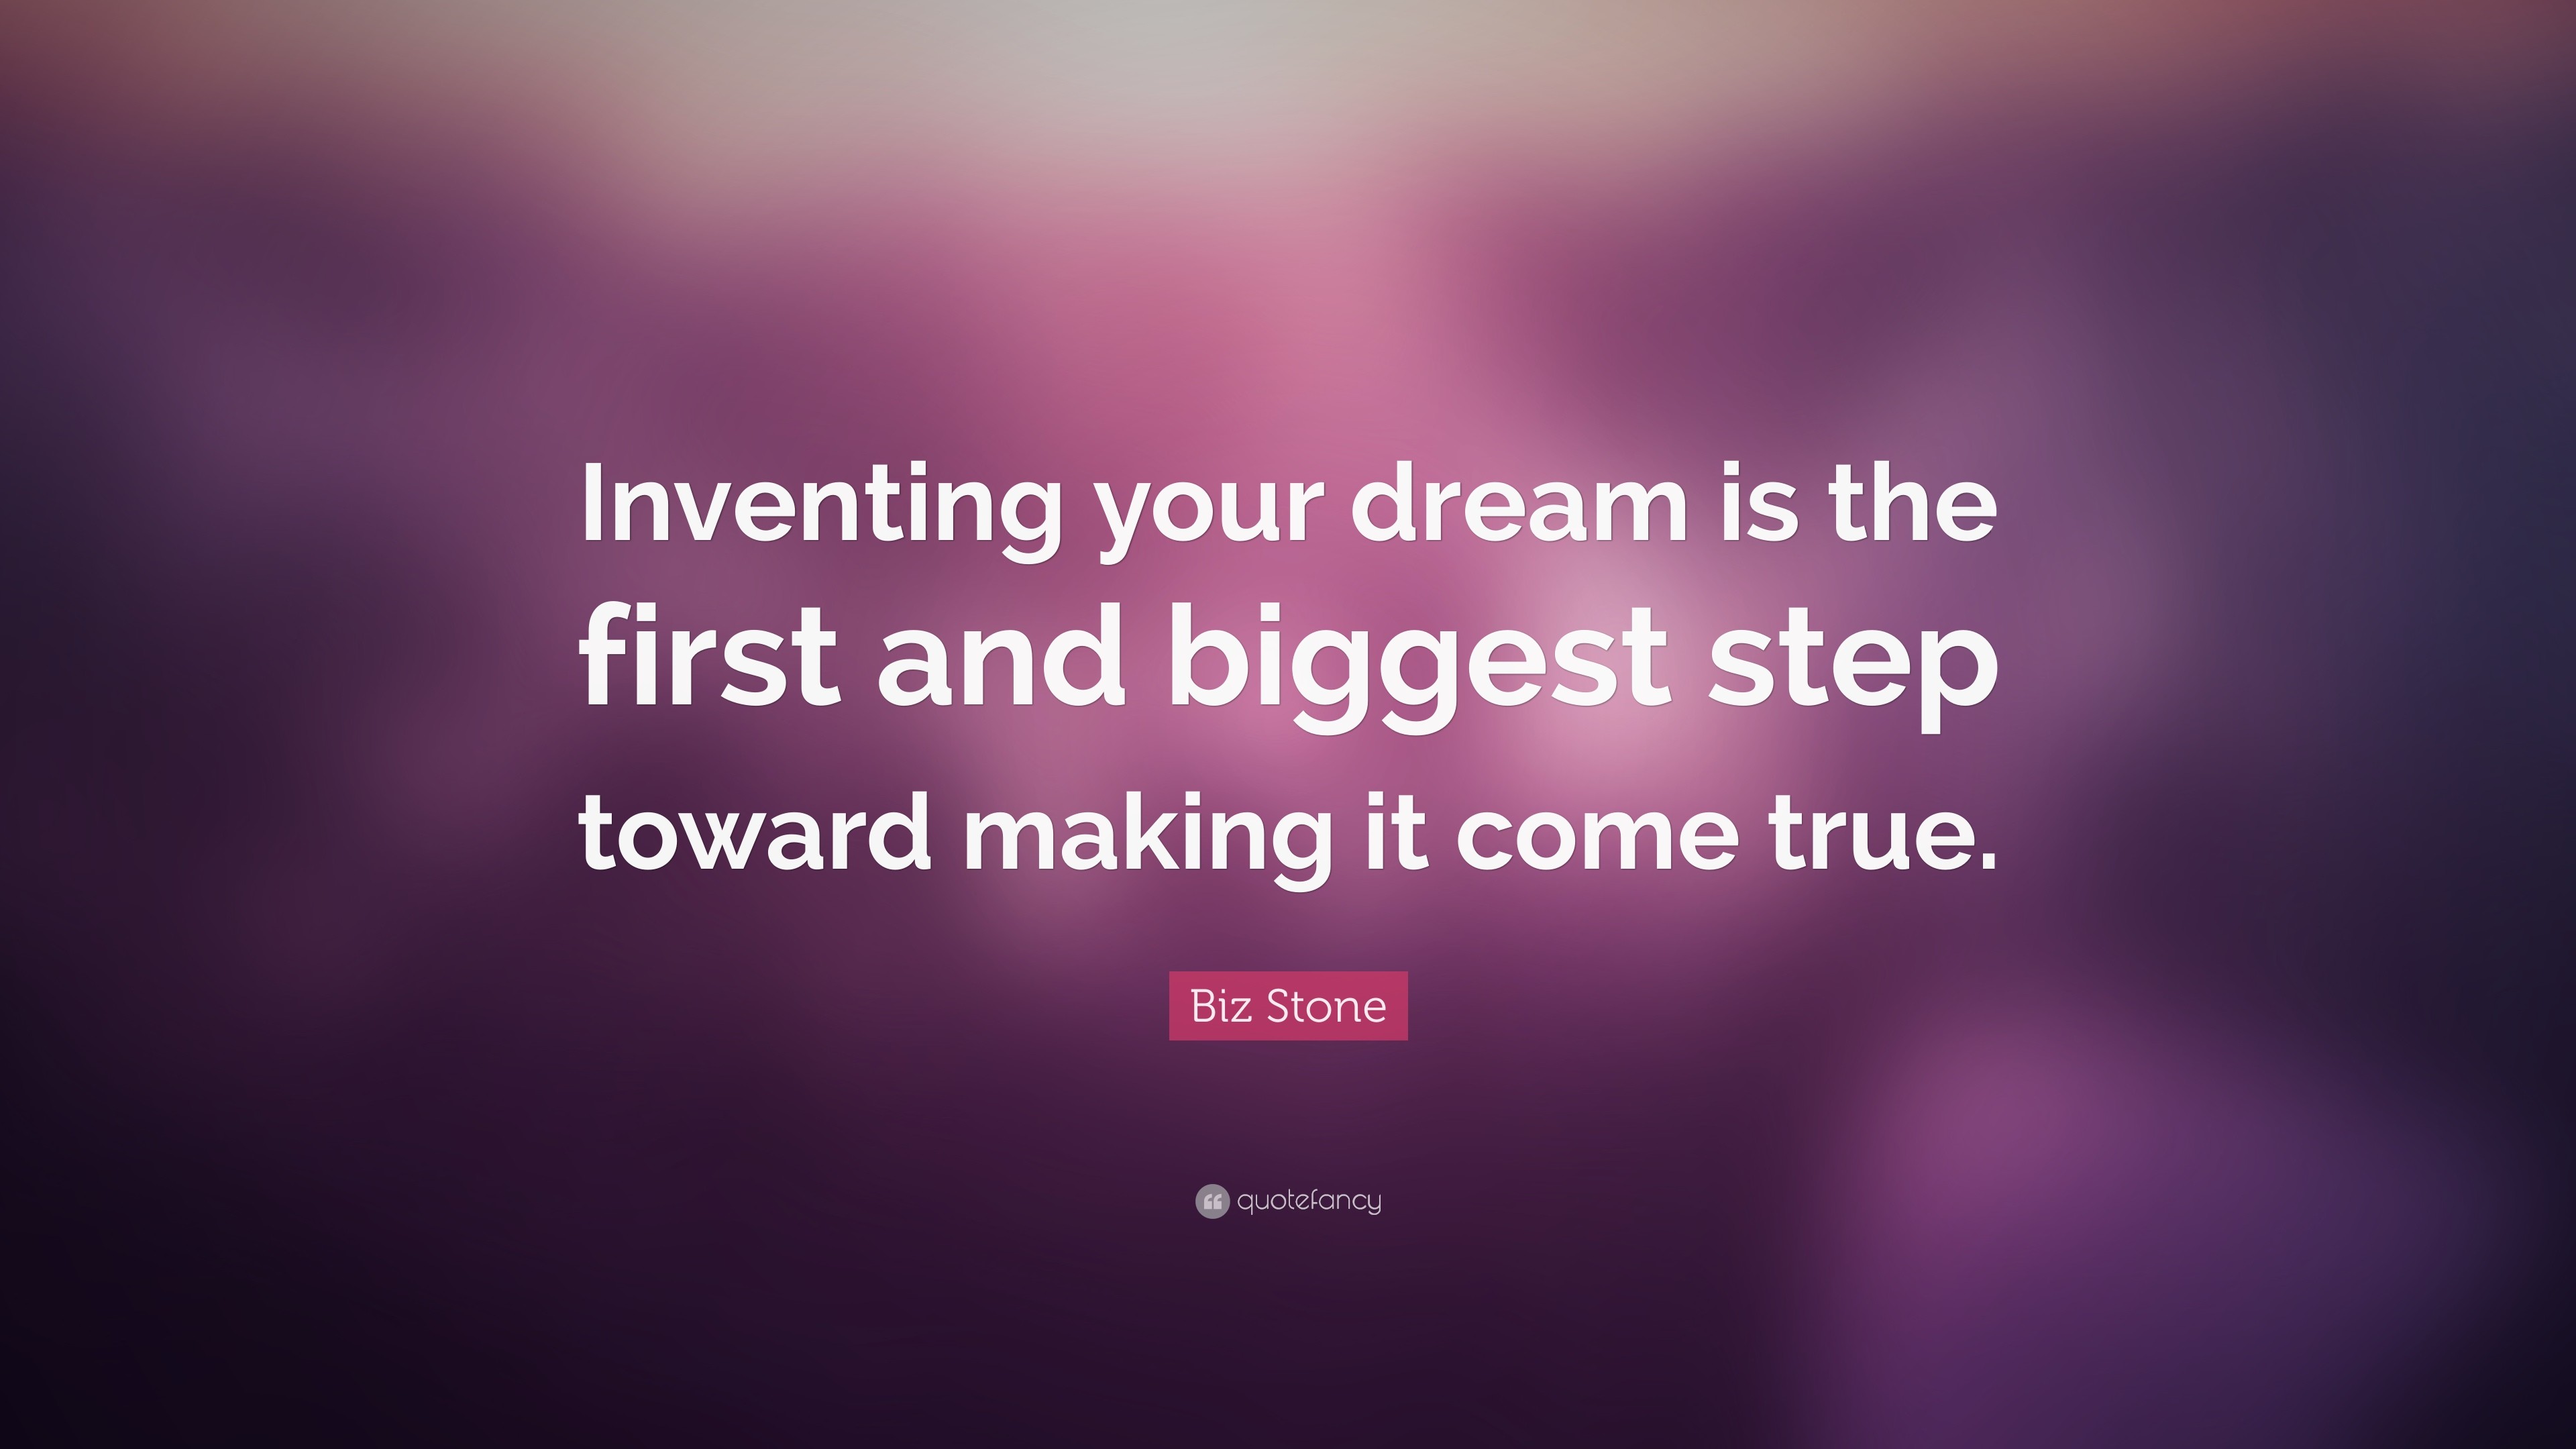 3840x2160 Never stop dreaming quotes wallpaper quotesgram - Biz Stone Quote Inventing  Your Dream Is The First